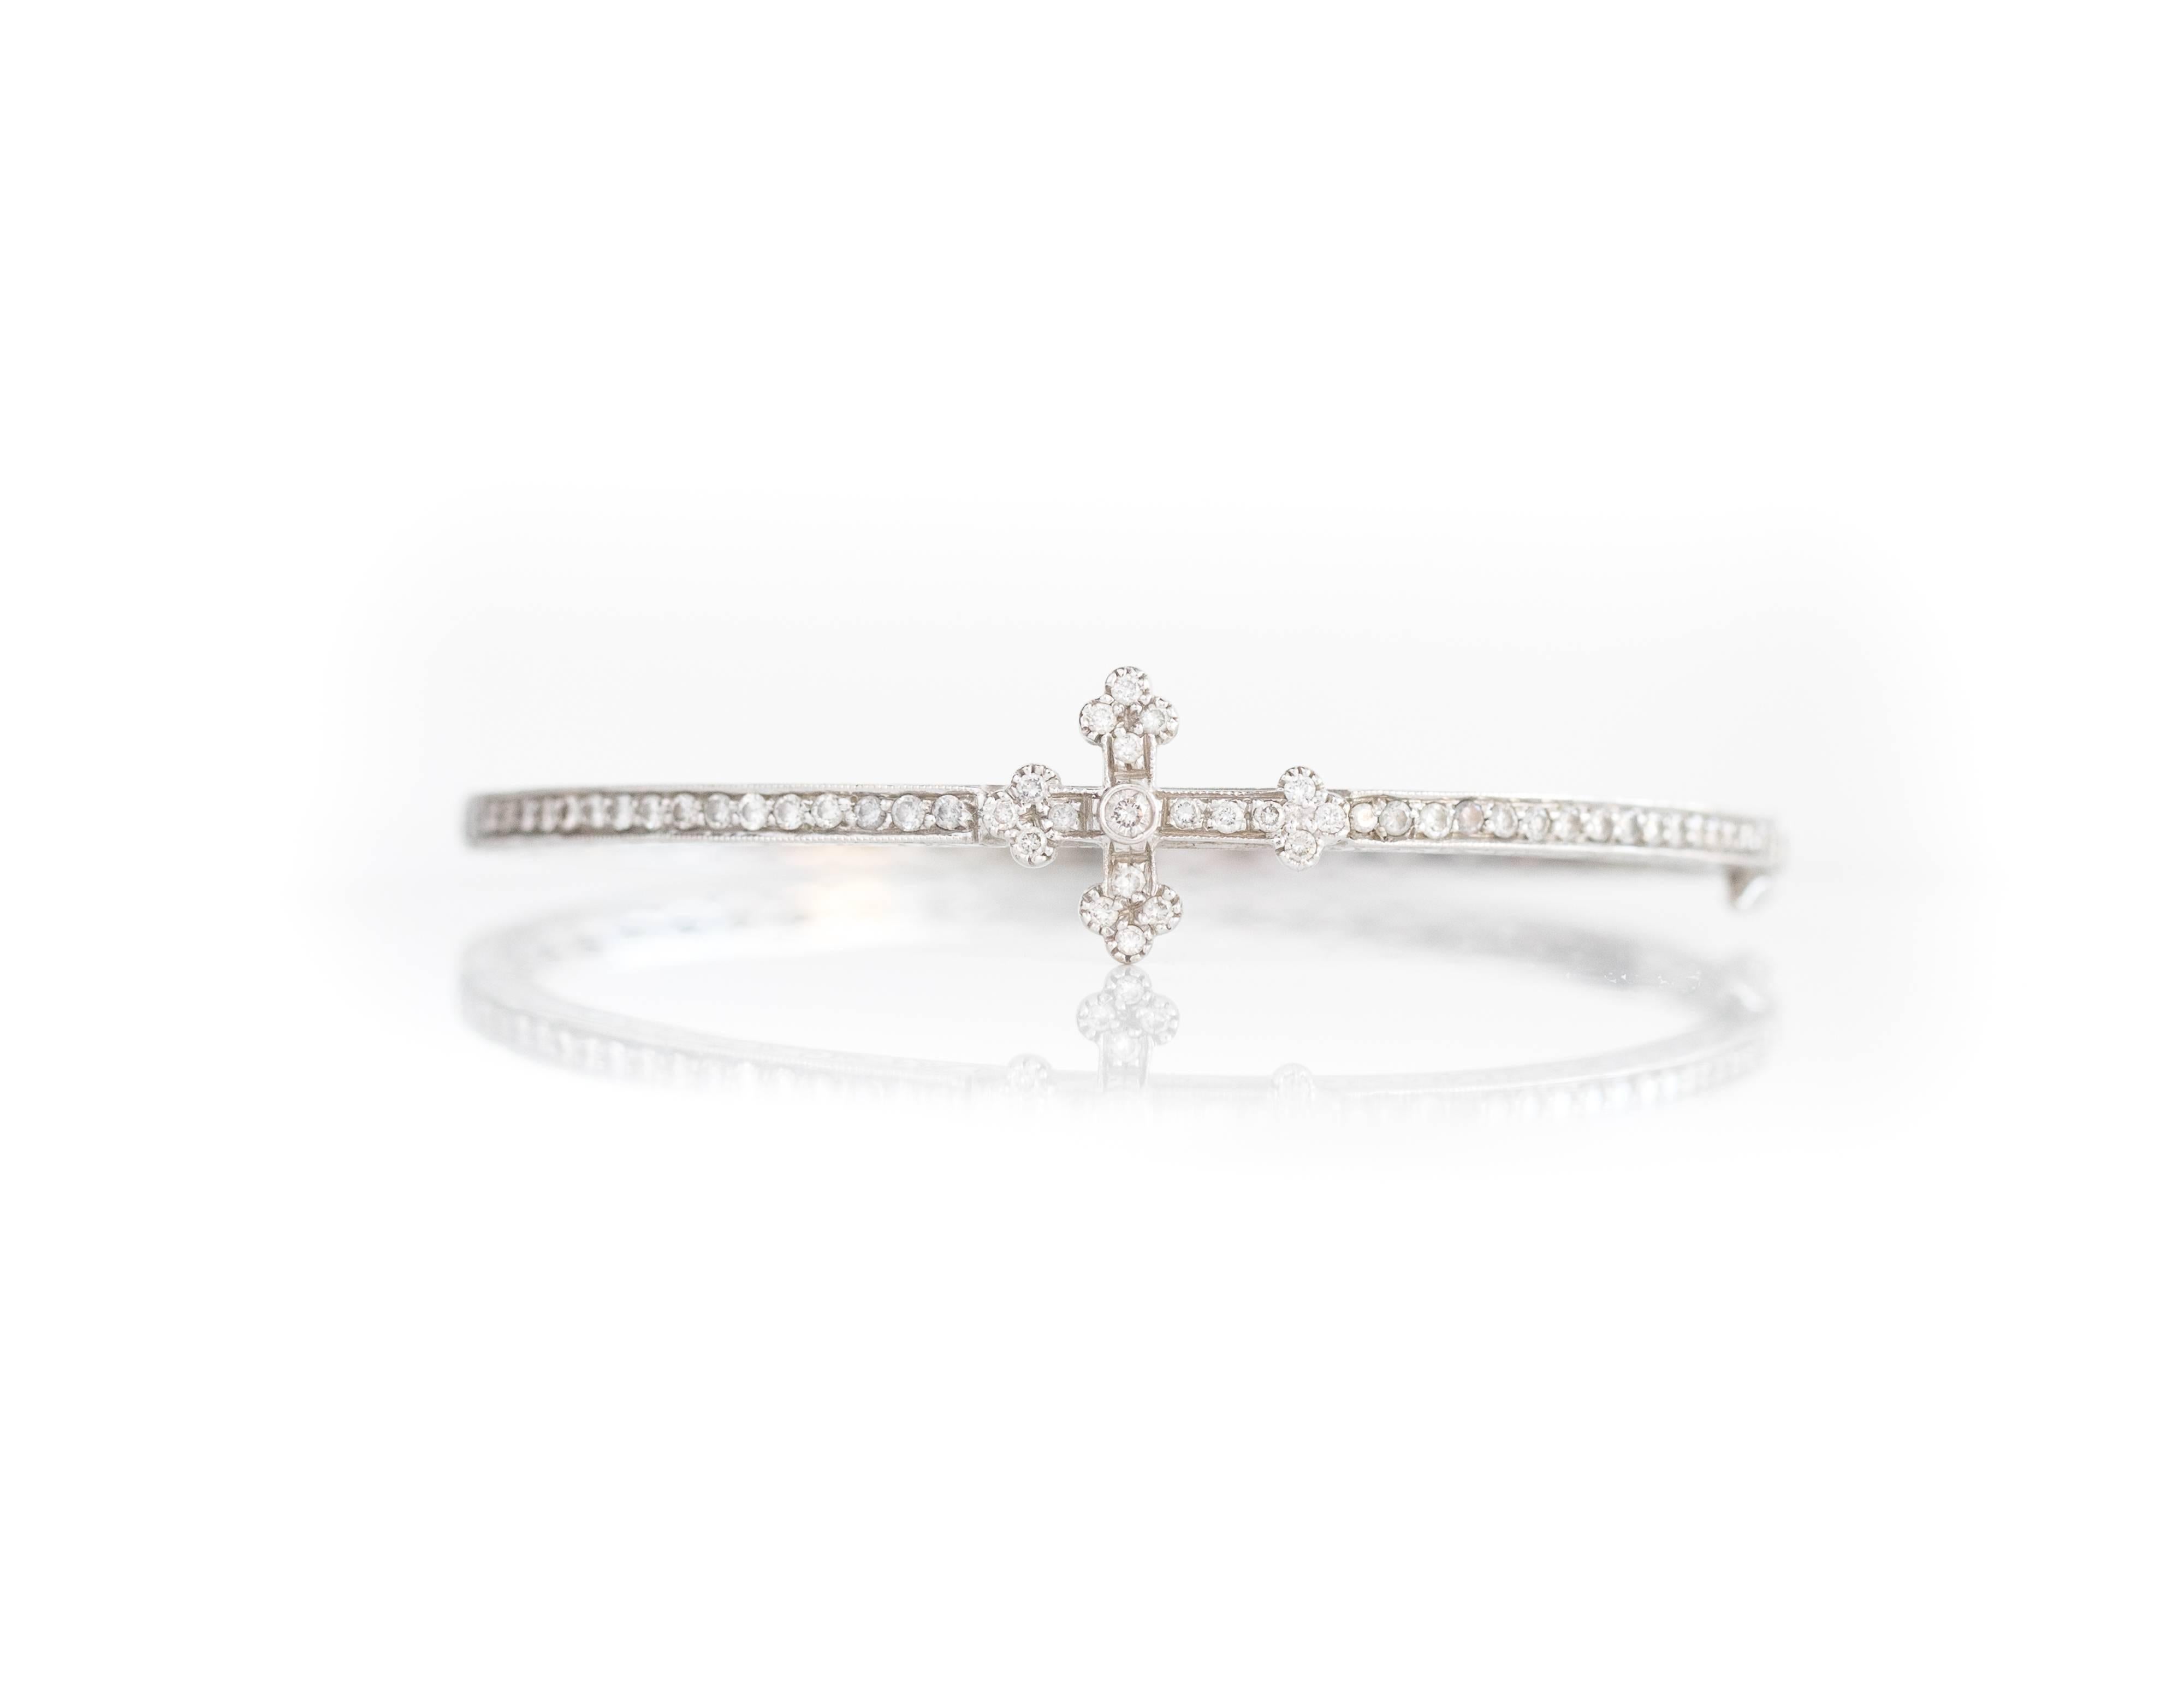 This Jude Frances Guinevere Bangle features 18 karat white gold with a pave and bezel set diamond cross on a pave diamond  bracelet. This hinged bangle bracelet has a safety clasp and fits up to a 7.25 inch wrist. 


Bracelet Details:
Metal Type: 18